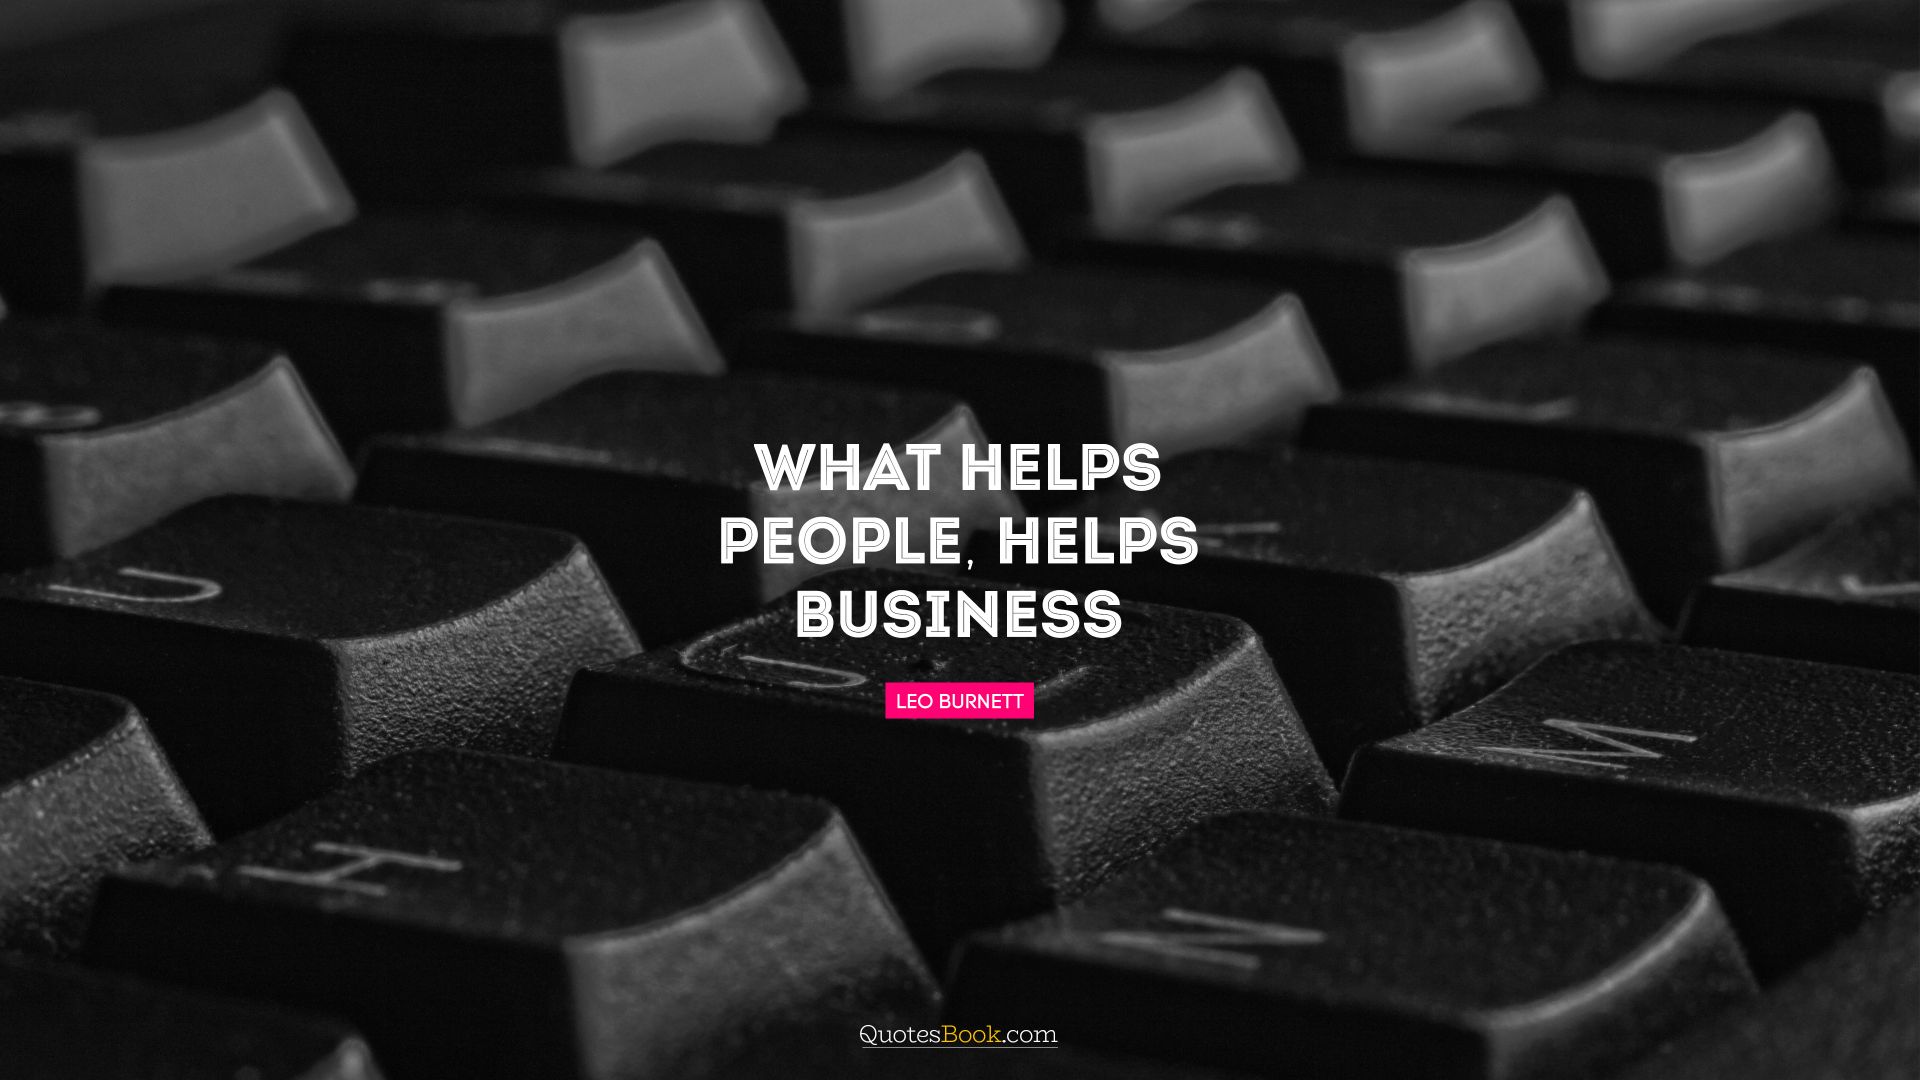 What helps people, helps business. - Quote by Leo Burnett